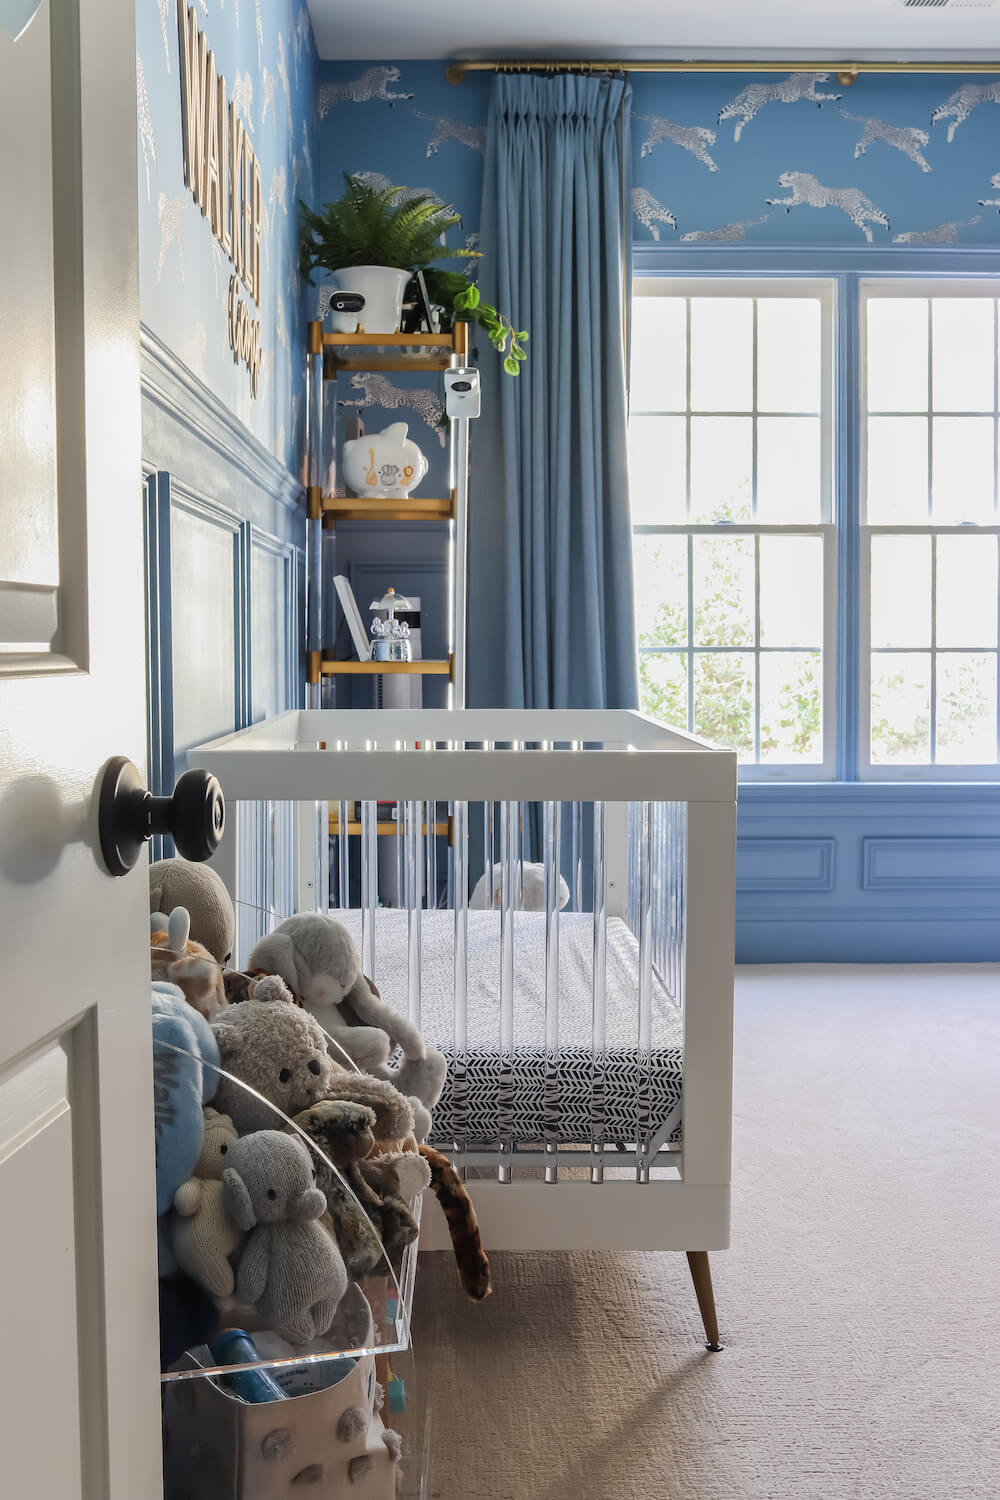 white crib with acrylic bars and blue walls in a nursery